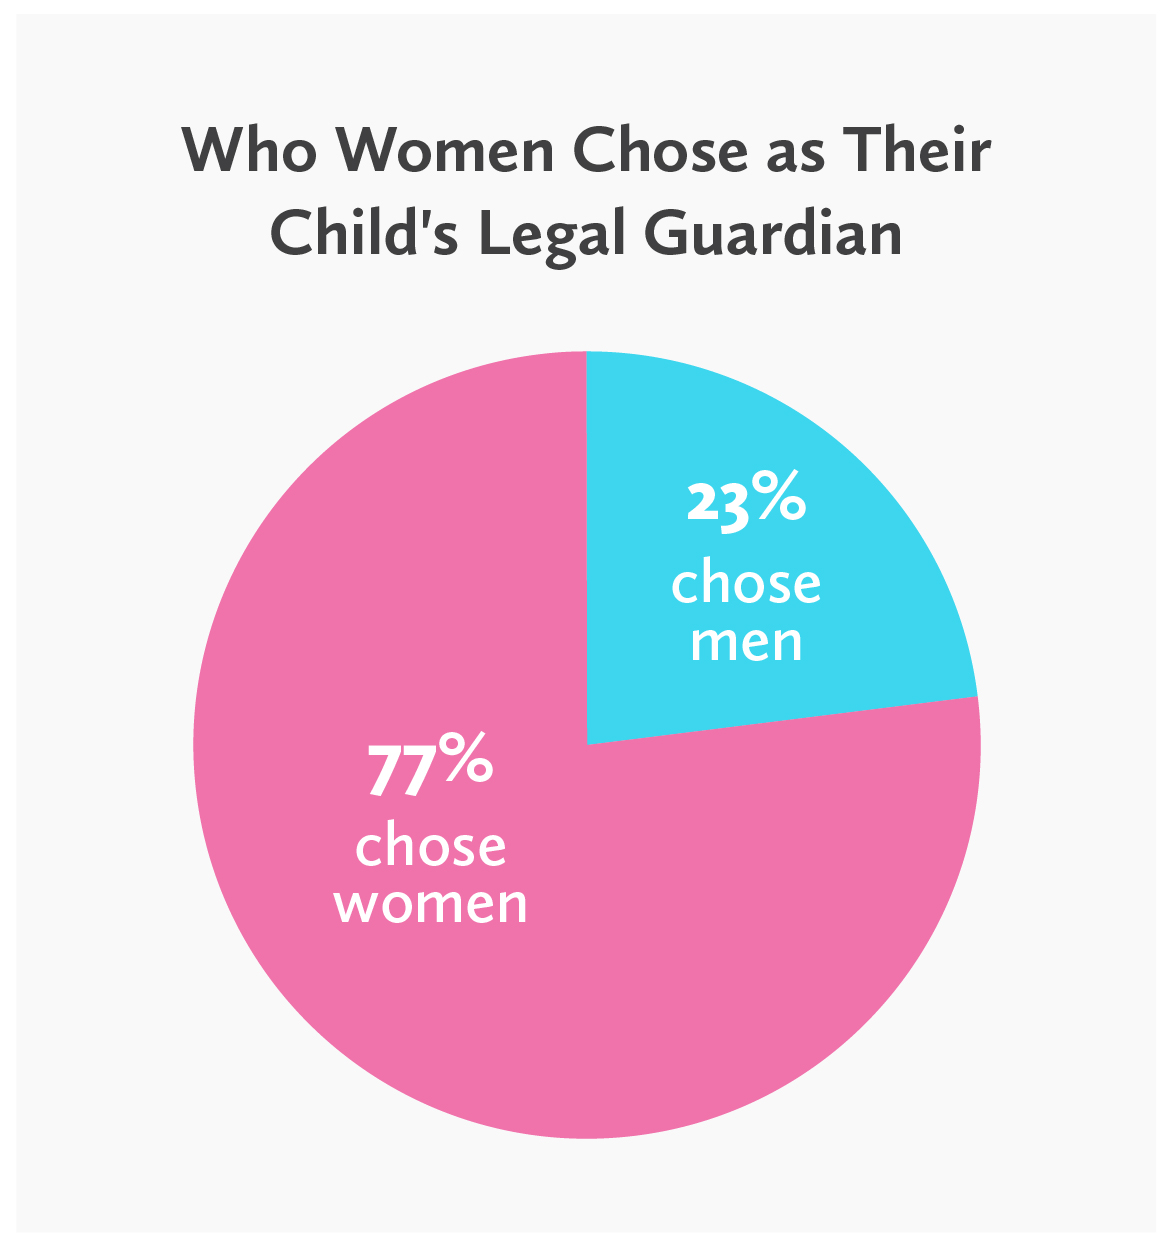 pie chart - who women choose as their child's legal guardian by gender